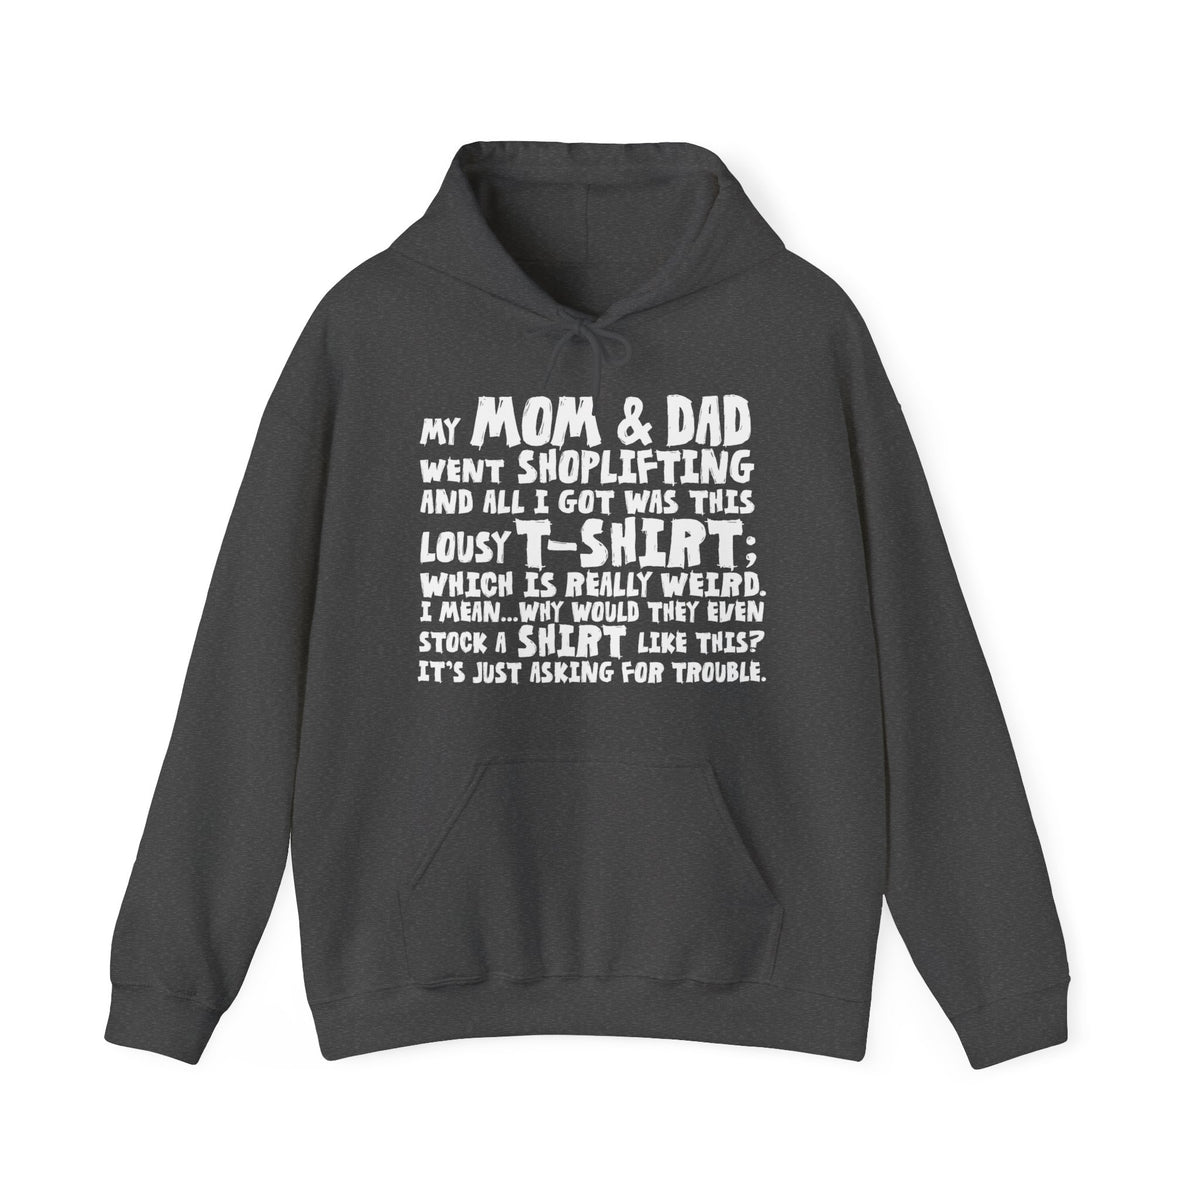 My Mom & Dad Went Shoplifting And All I Got Was This Lousy T-Shirt; Which Is Really Weird. I Mean... Why Would They Even Stock A Shirt Like This? It's Just Asking For Trouble. - Hoodie